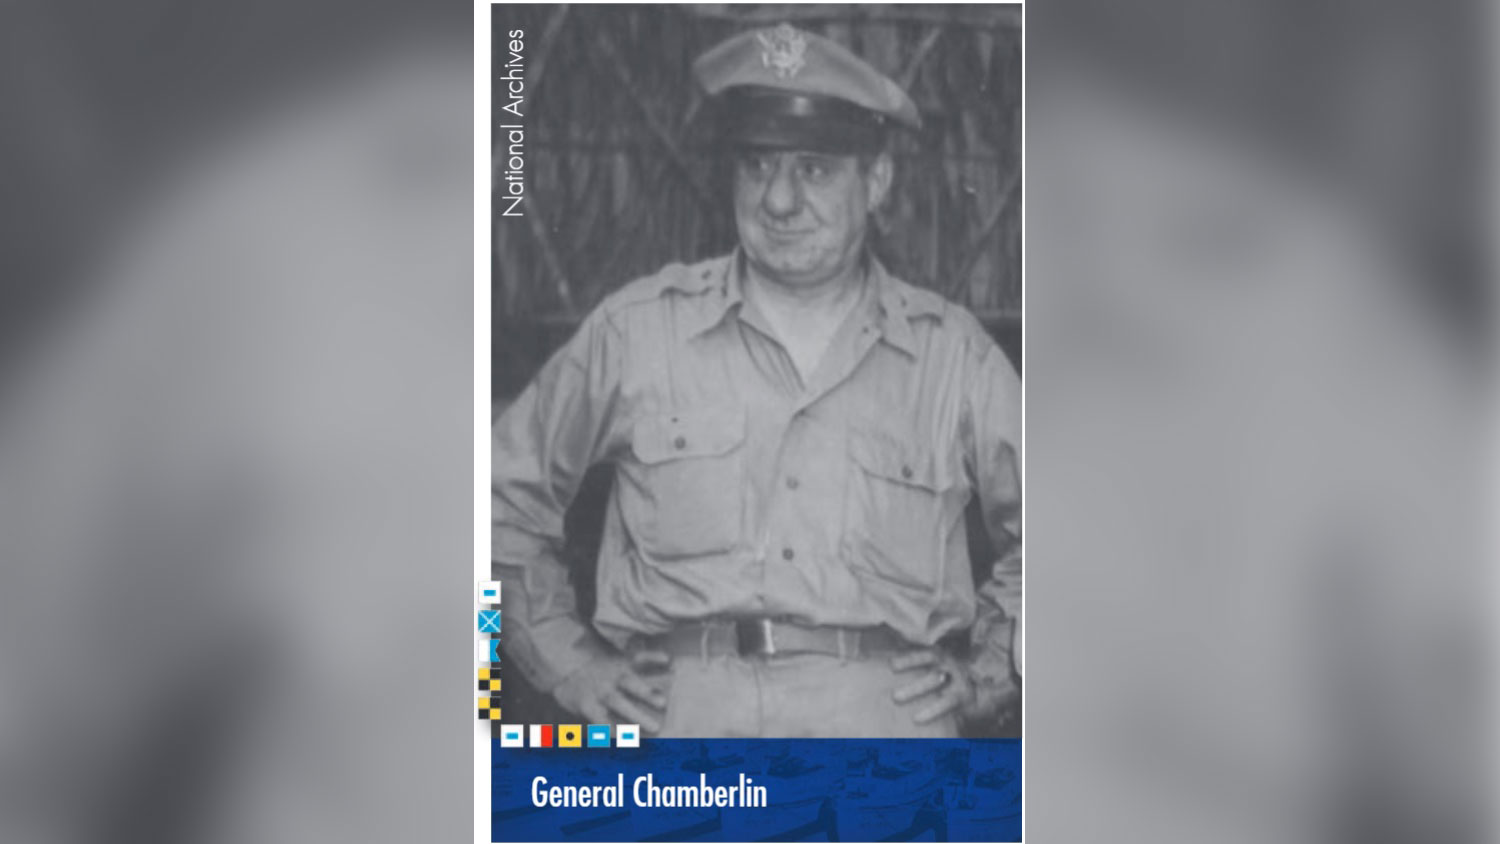 General Chamberlin. Photo from the National Archives.